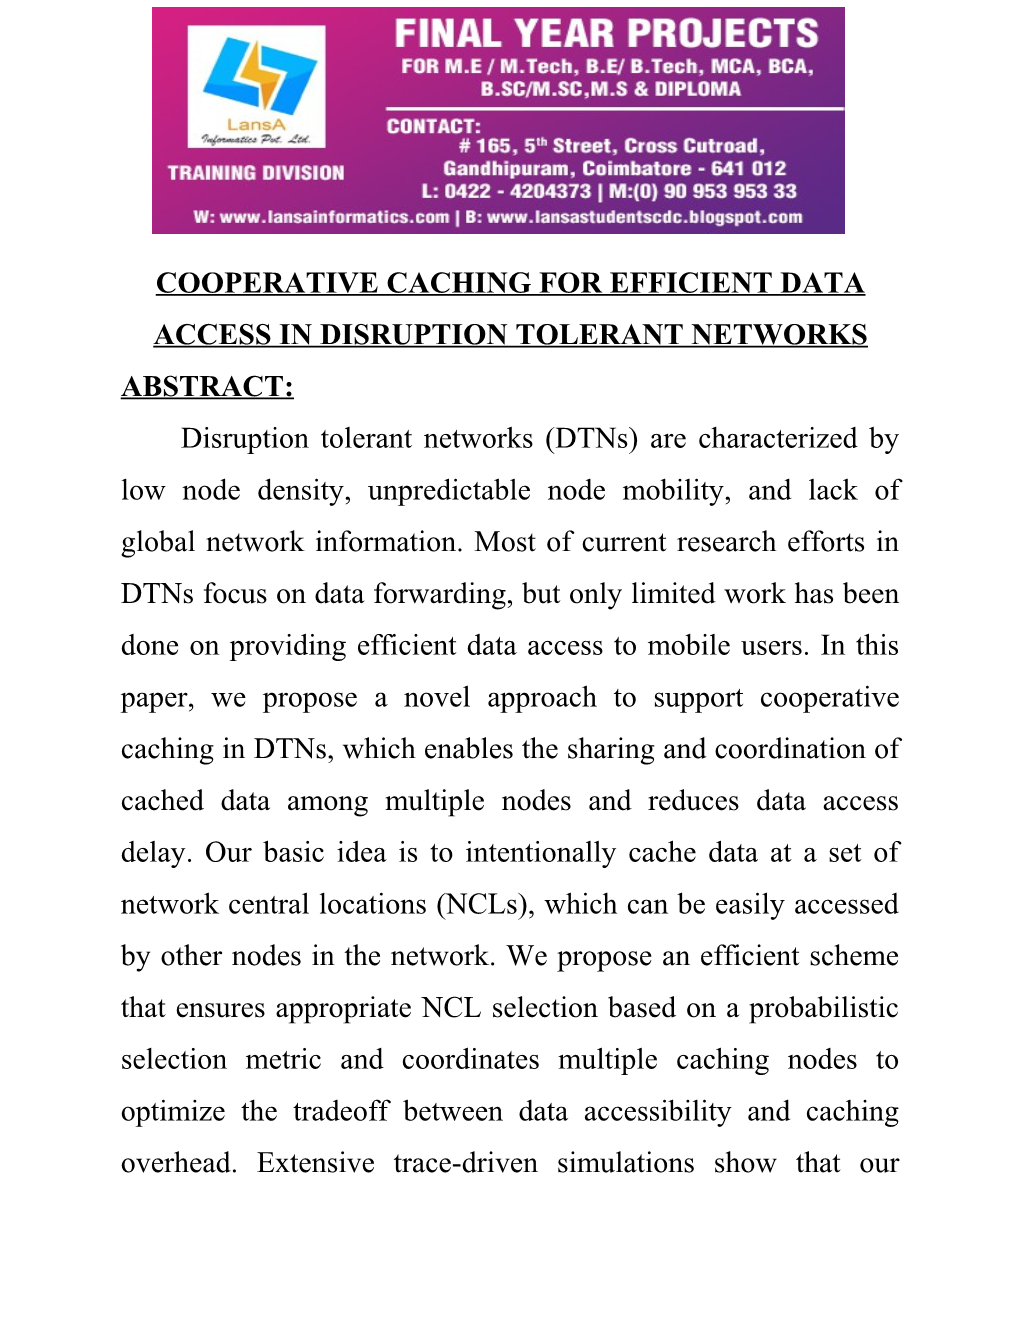 Cooperative Caching for Efficient Dataaccess in Disruption Tolerant Networks